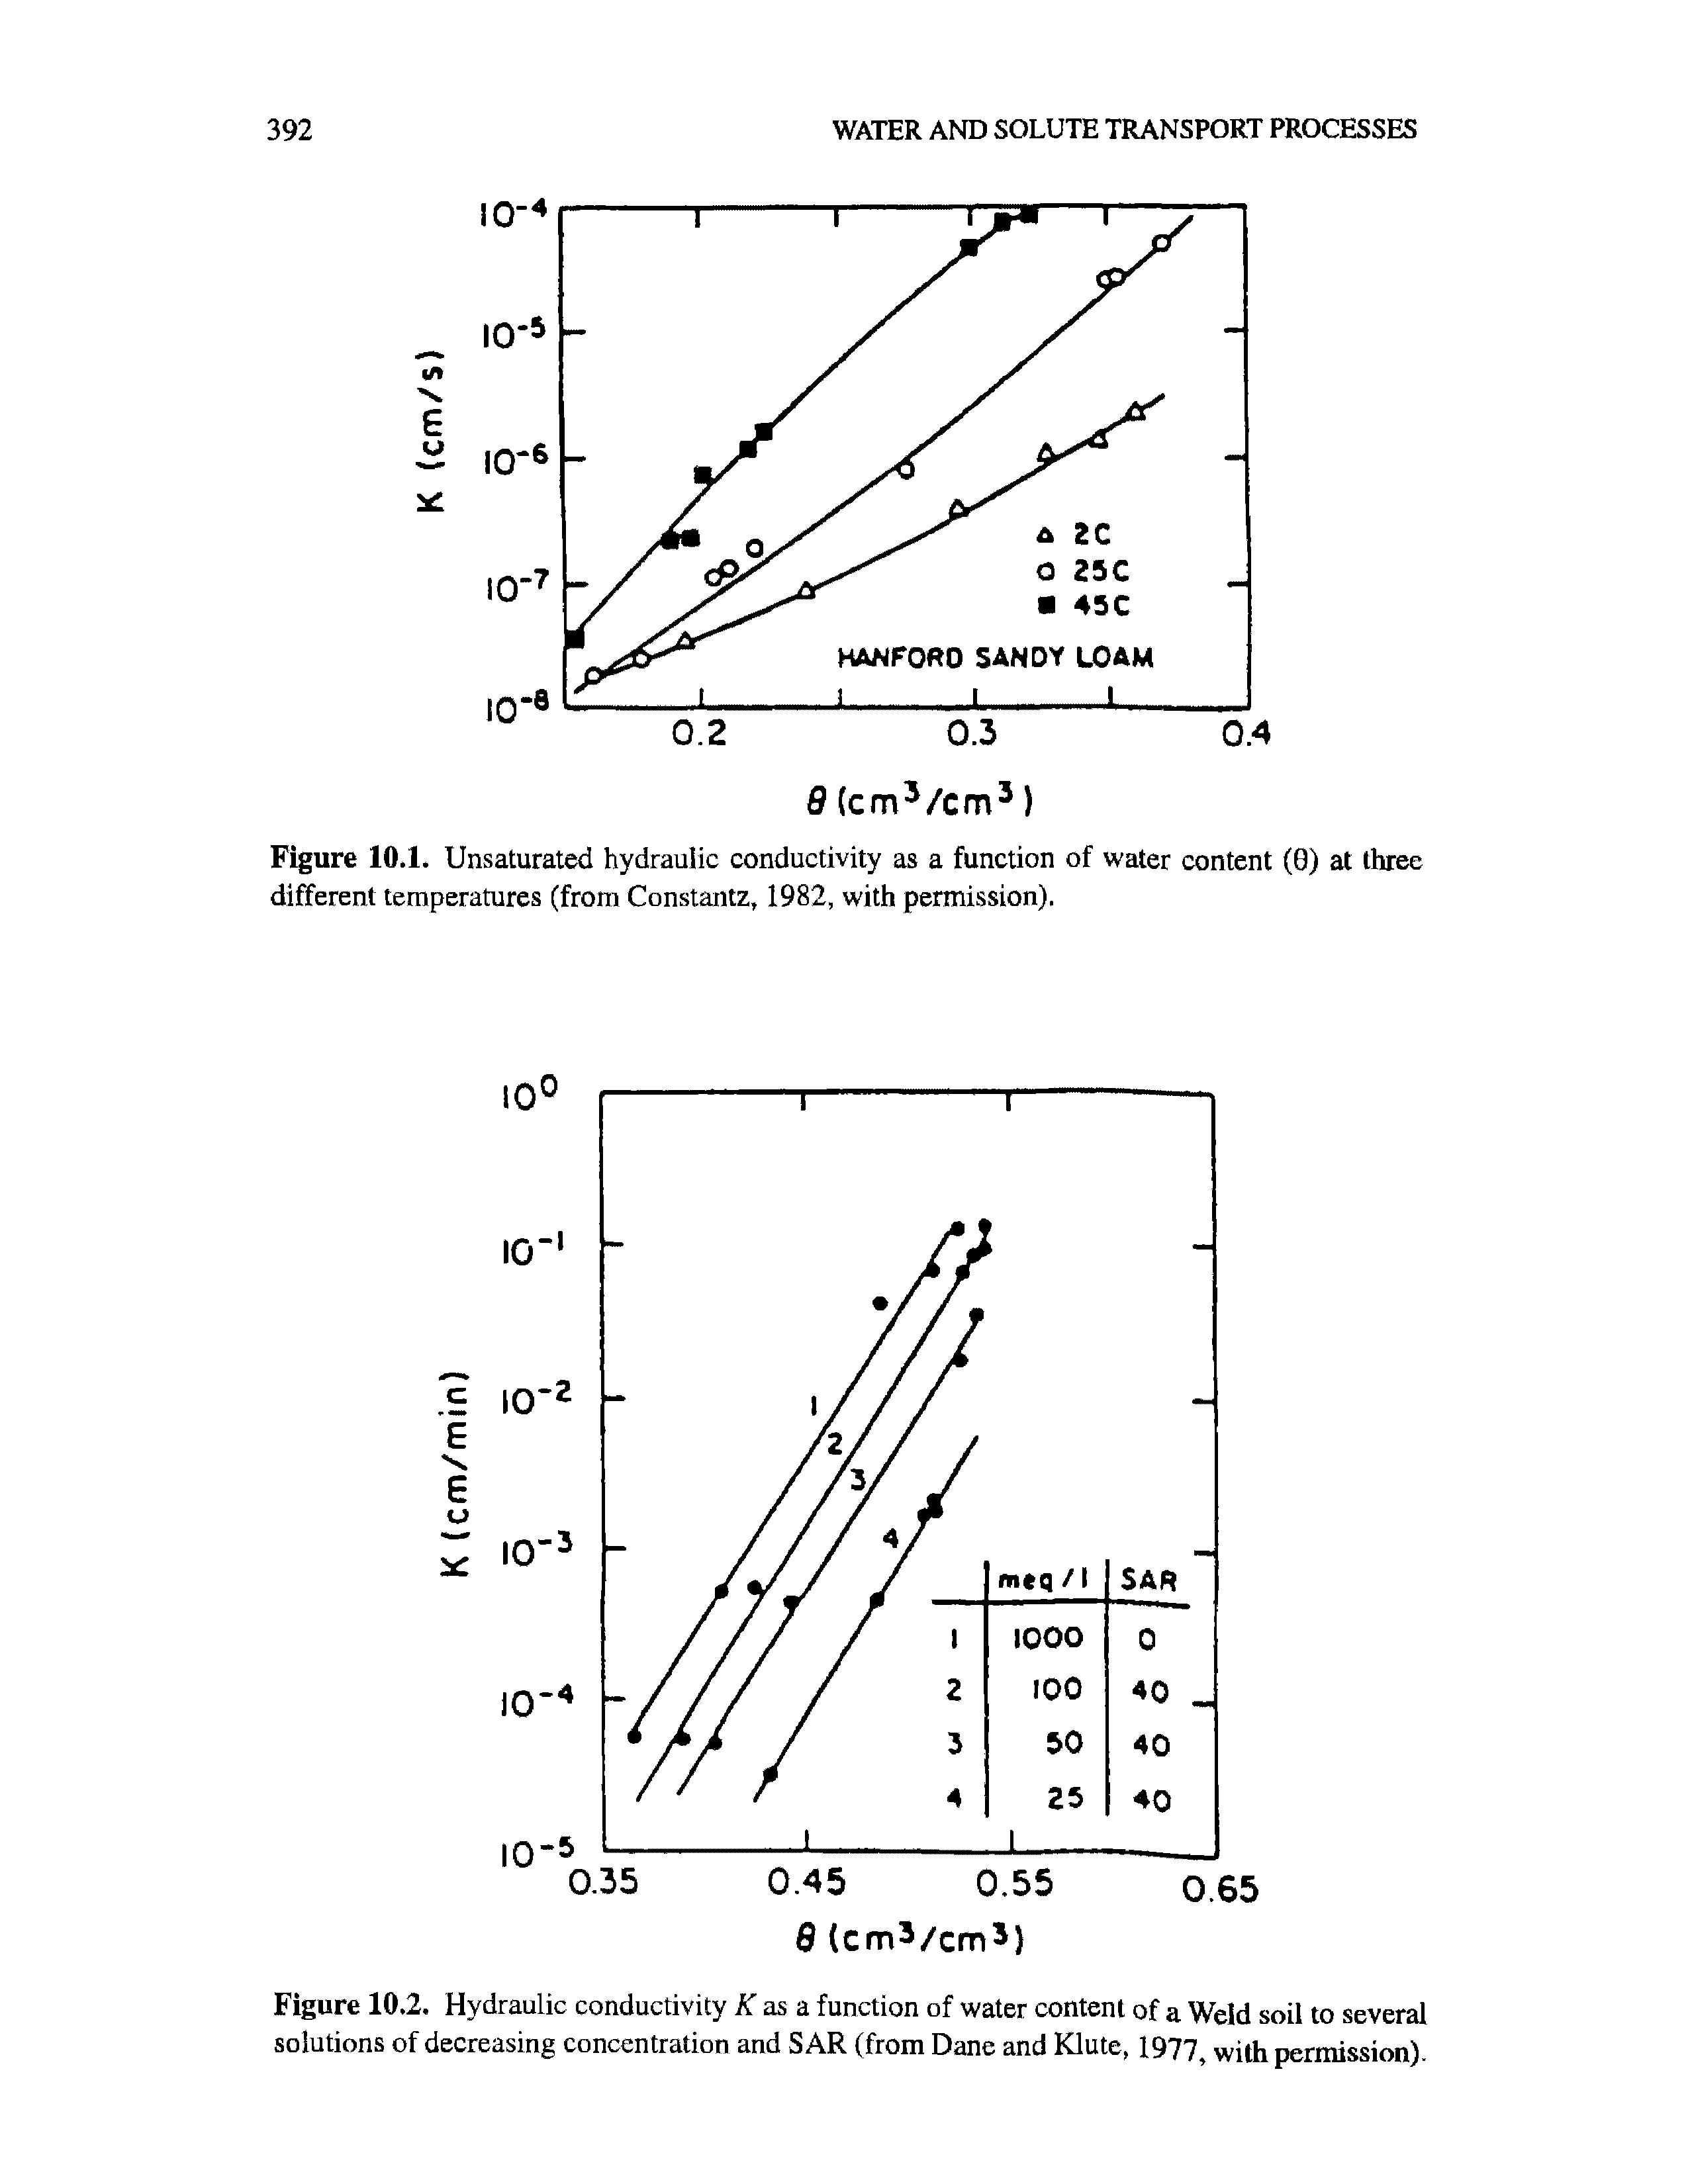 Figure 10.2. Hydraulic conductivity K as a function of water content of a Weld soil to several solutions of decreasing concentration and S AR (from Dane and Klute, 1977, with permission).